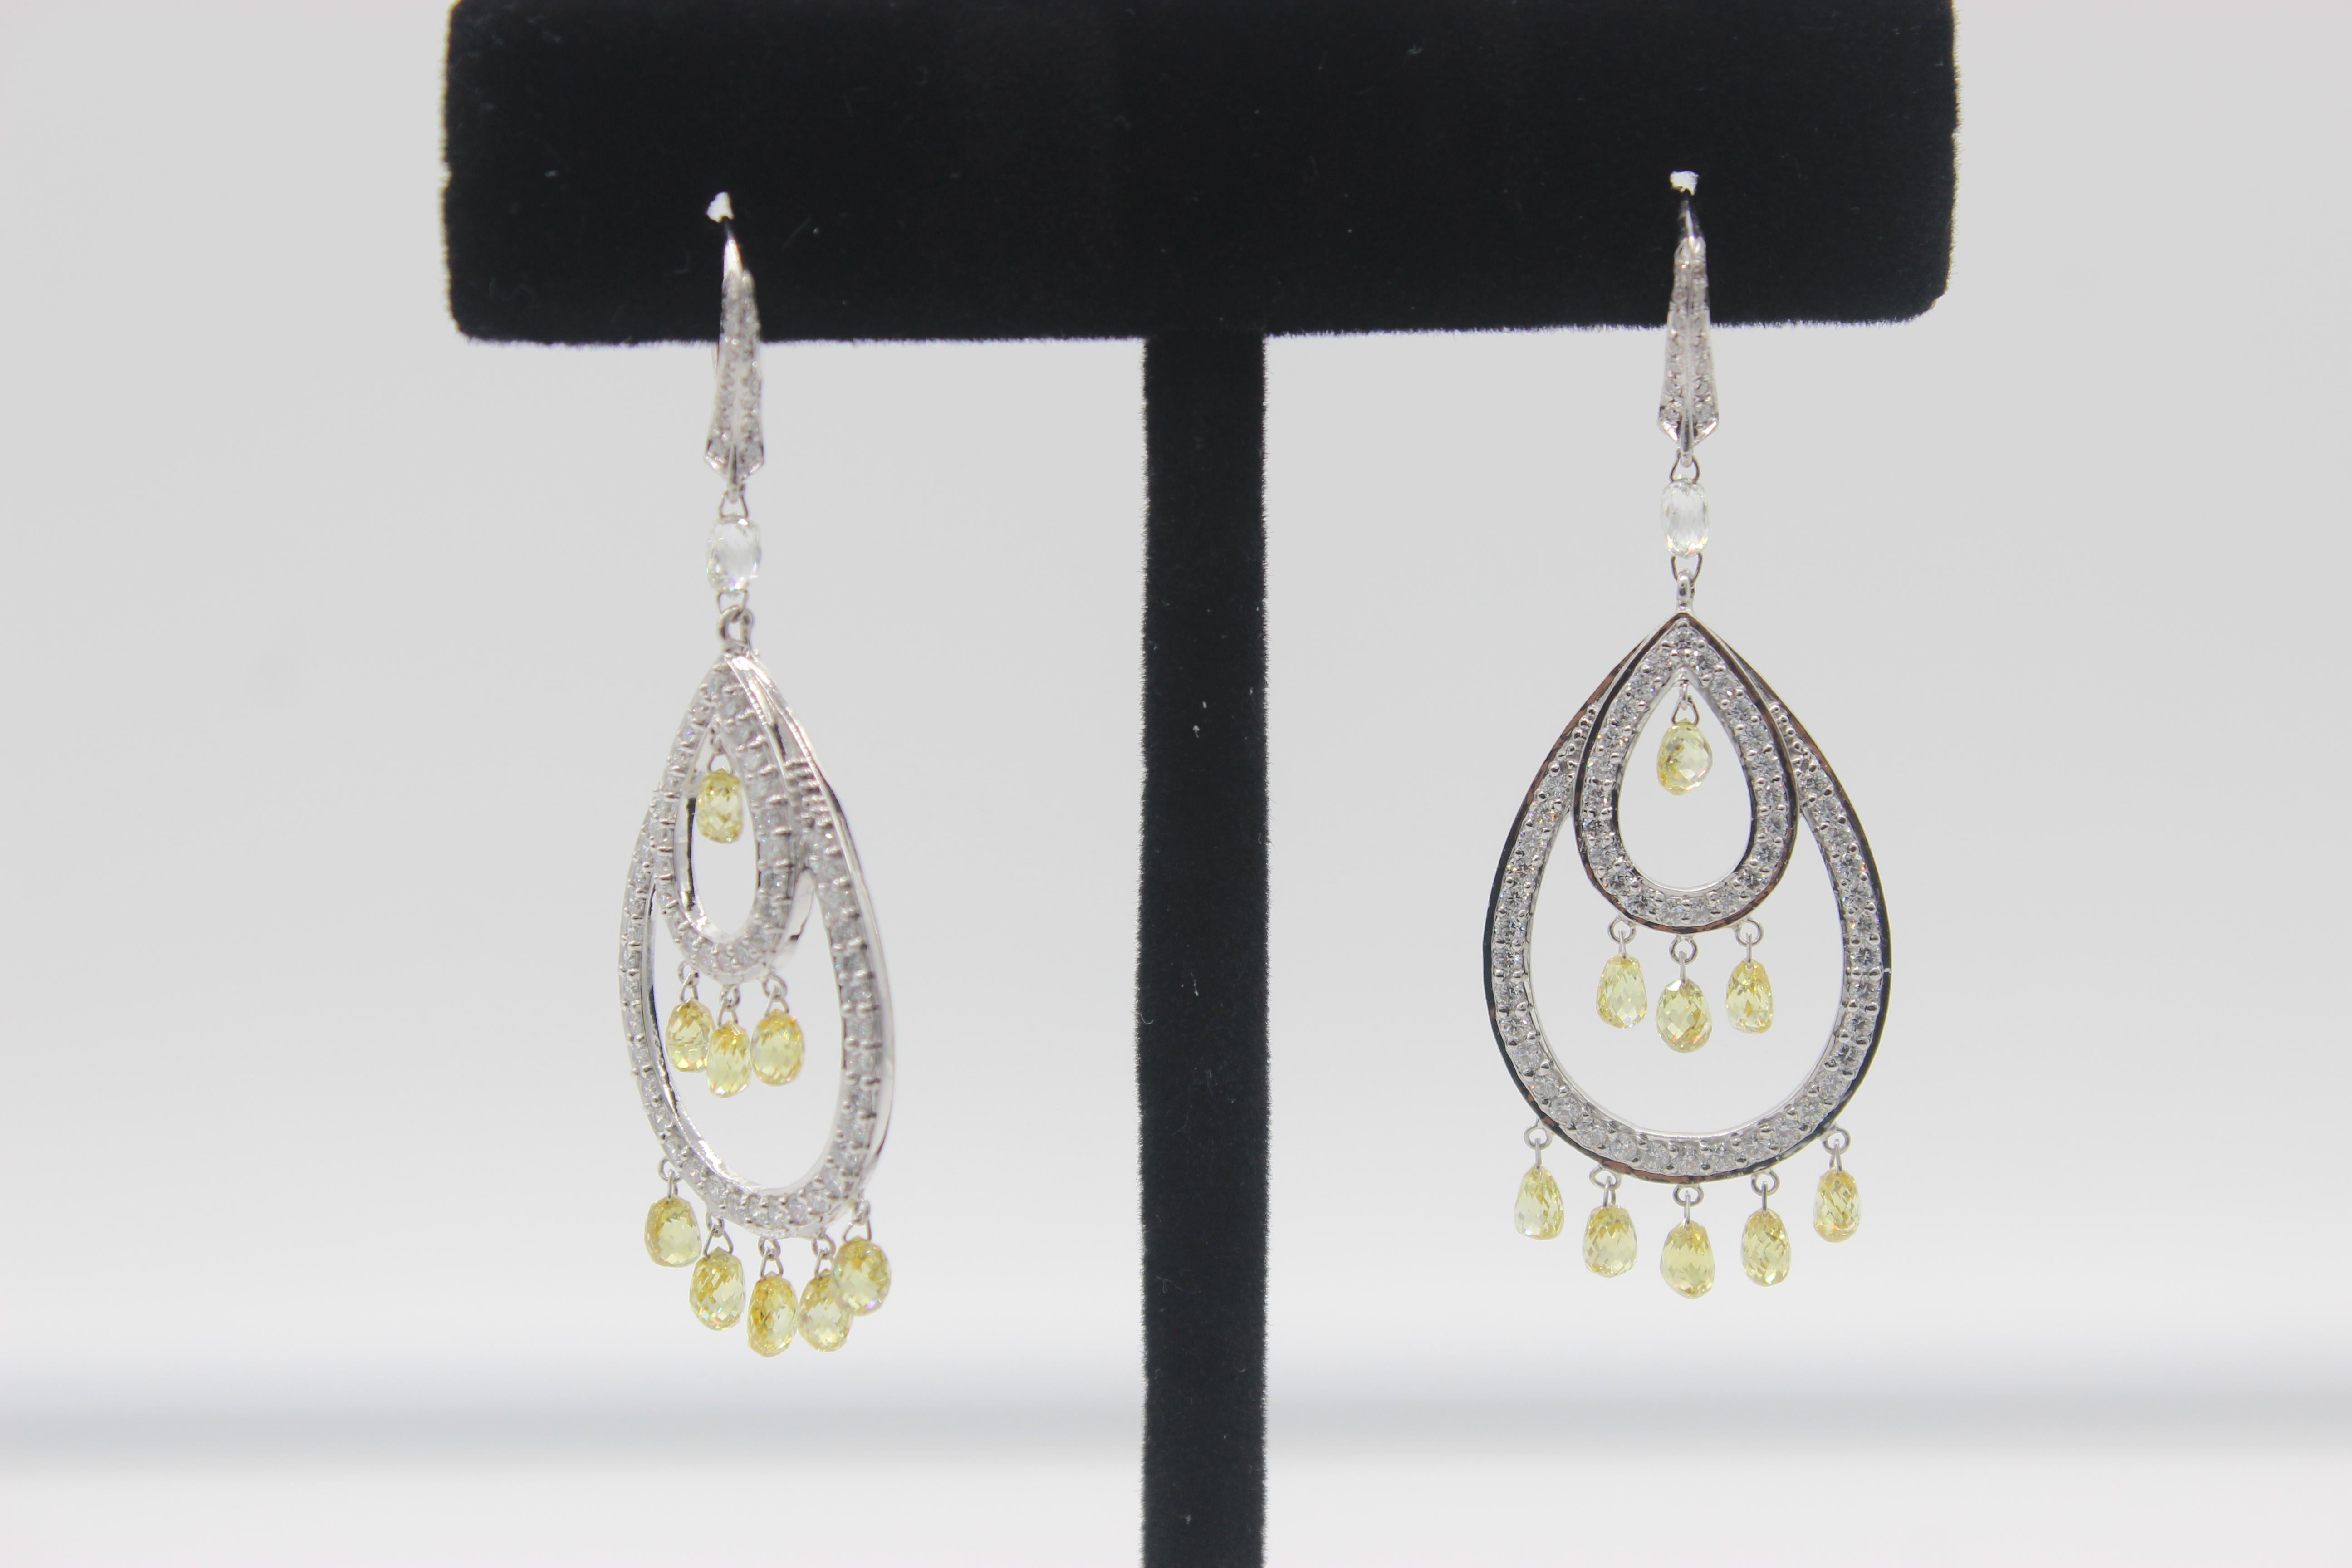 PANIM Fancy Briolettes Diamond  Dangler Earrings 18 Karat White Gold

These stunning fancy briolette dangler diamond earrings are One of a kind and handmade.

They are crafted in 18kt white gold, this pair of dangler earrings features a fancy